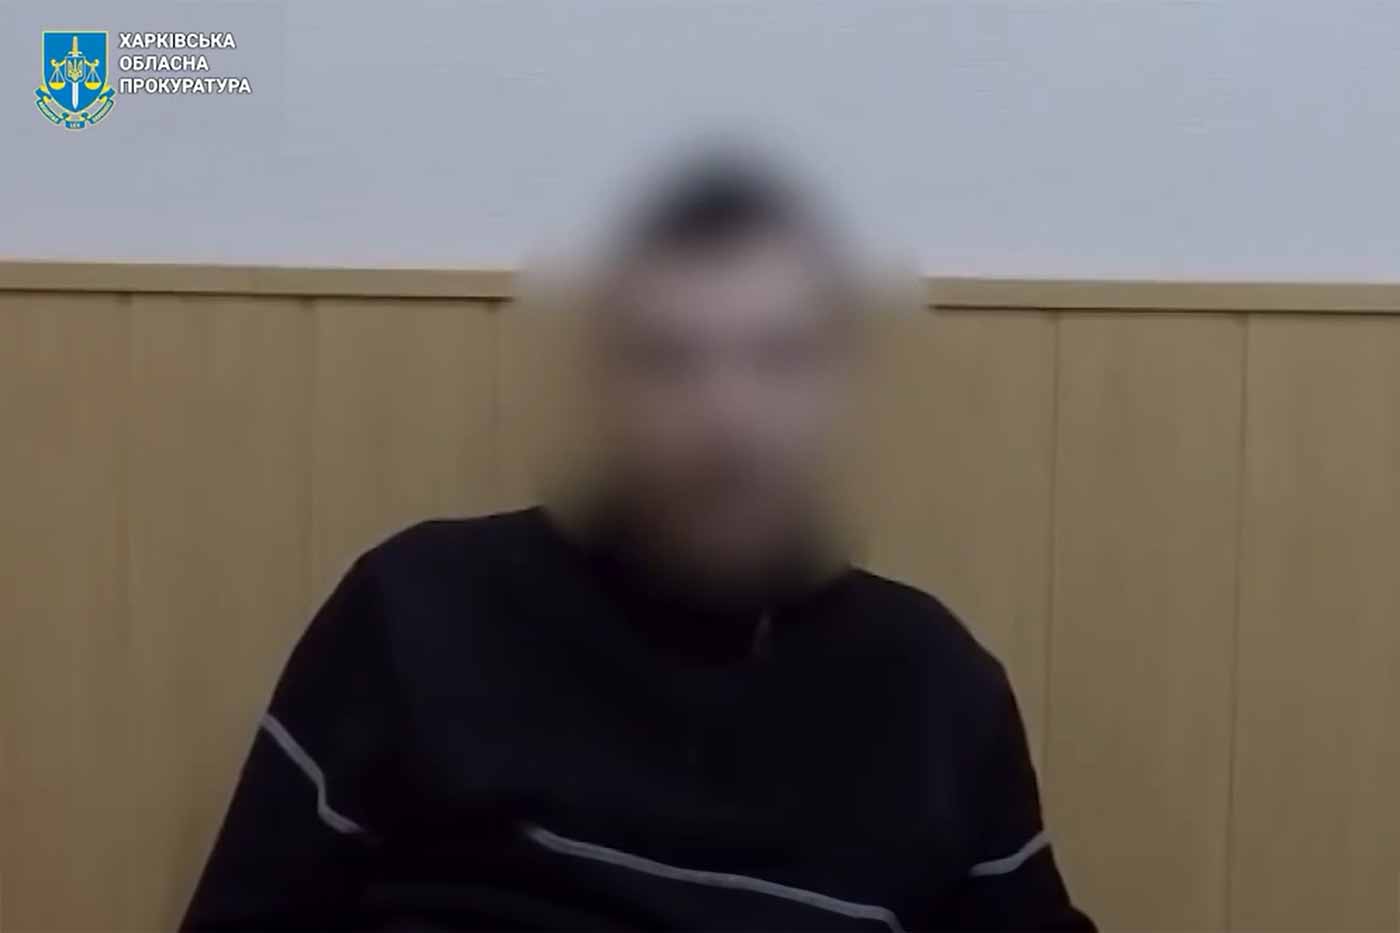 A Russian soldier disobeyed the order to fire against civilians in Kharkiv. He was injured and was captured. He testified during the trial against his former commander. His face was blurred in the video of the interrogation. © General Prosecutor's office